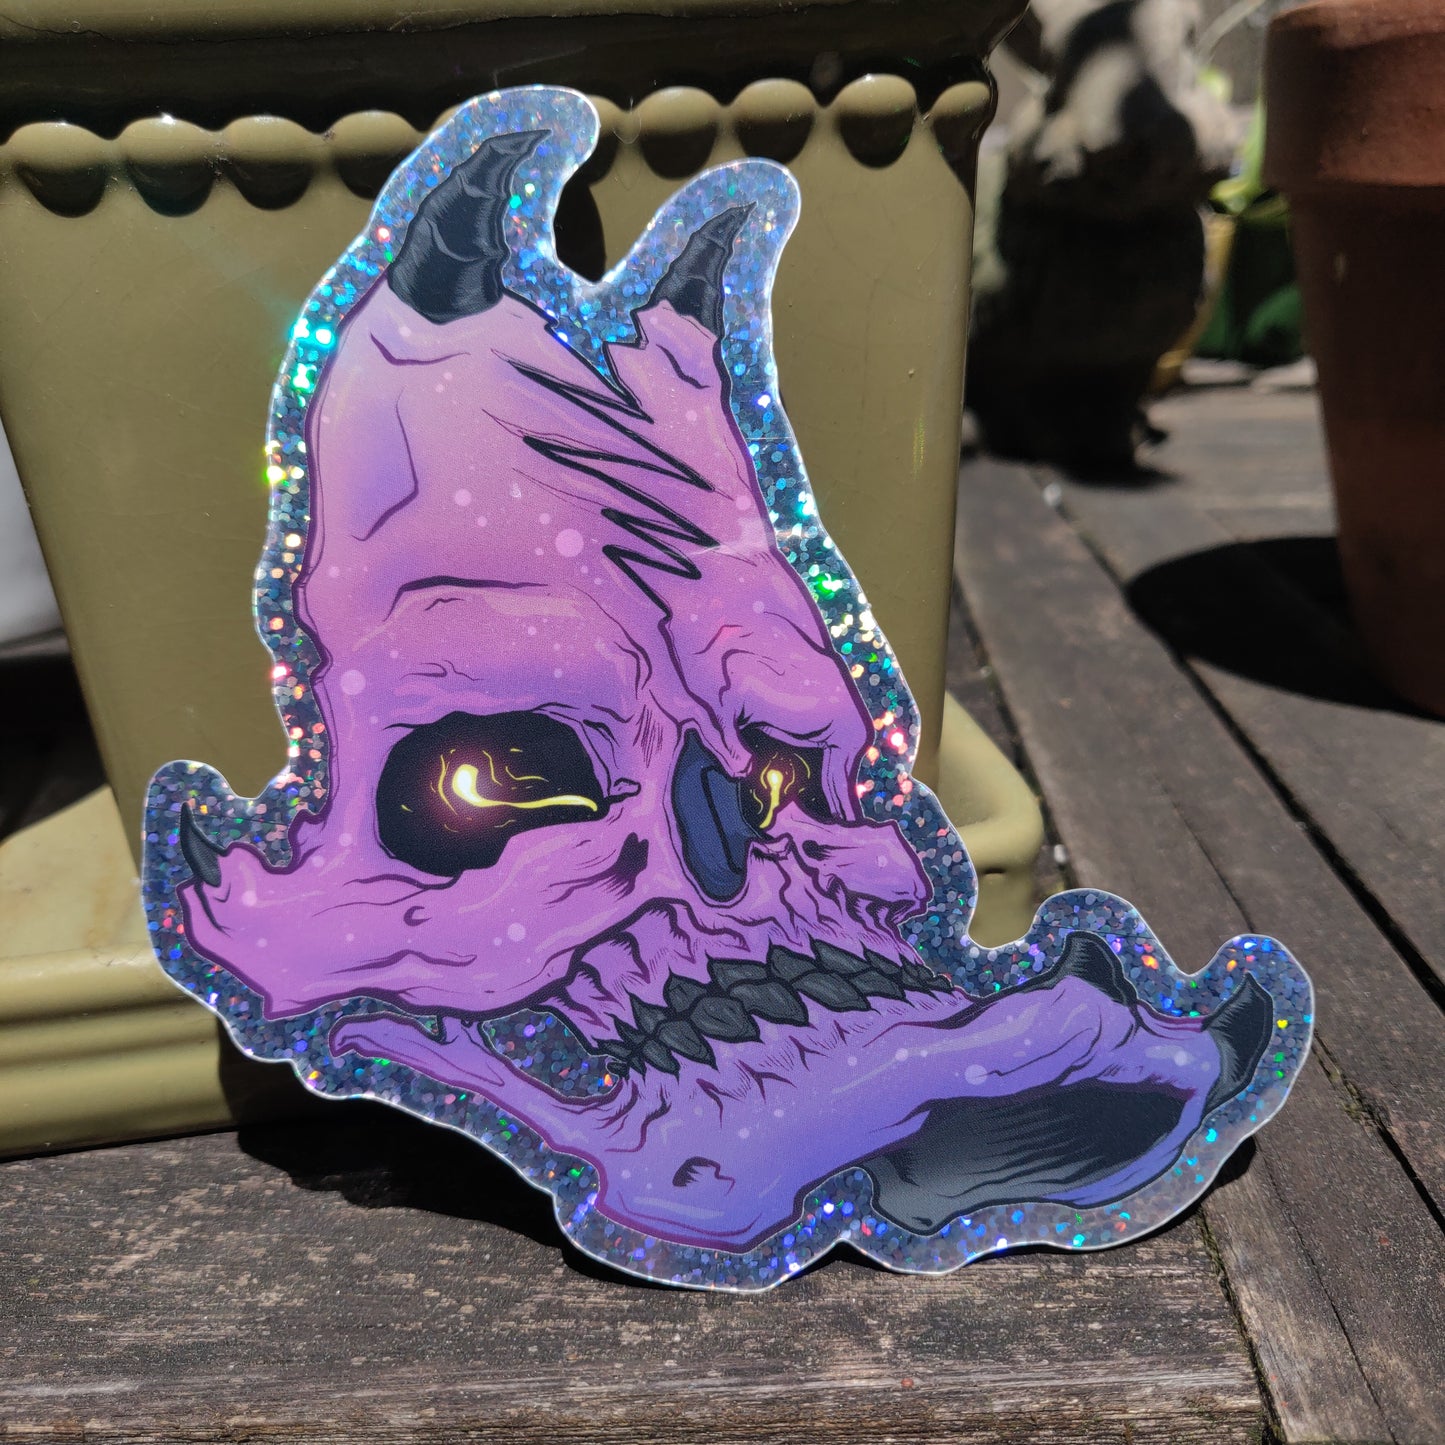 Big Skull Holographic STiCKERs by Monster Bloodbath